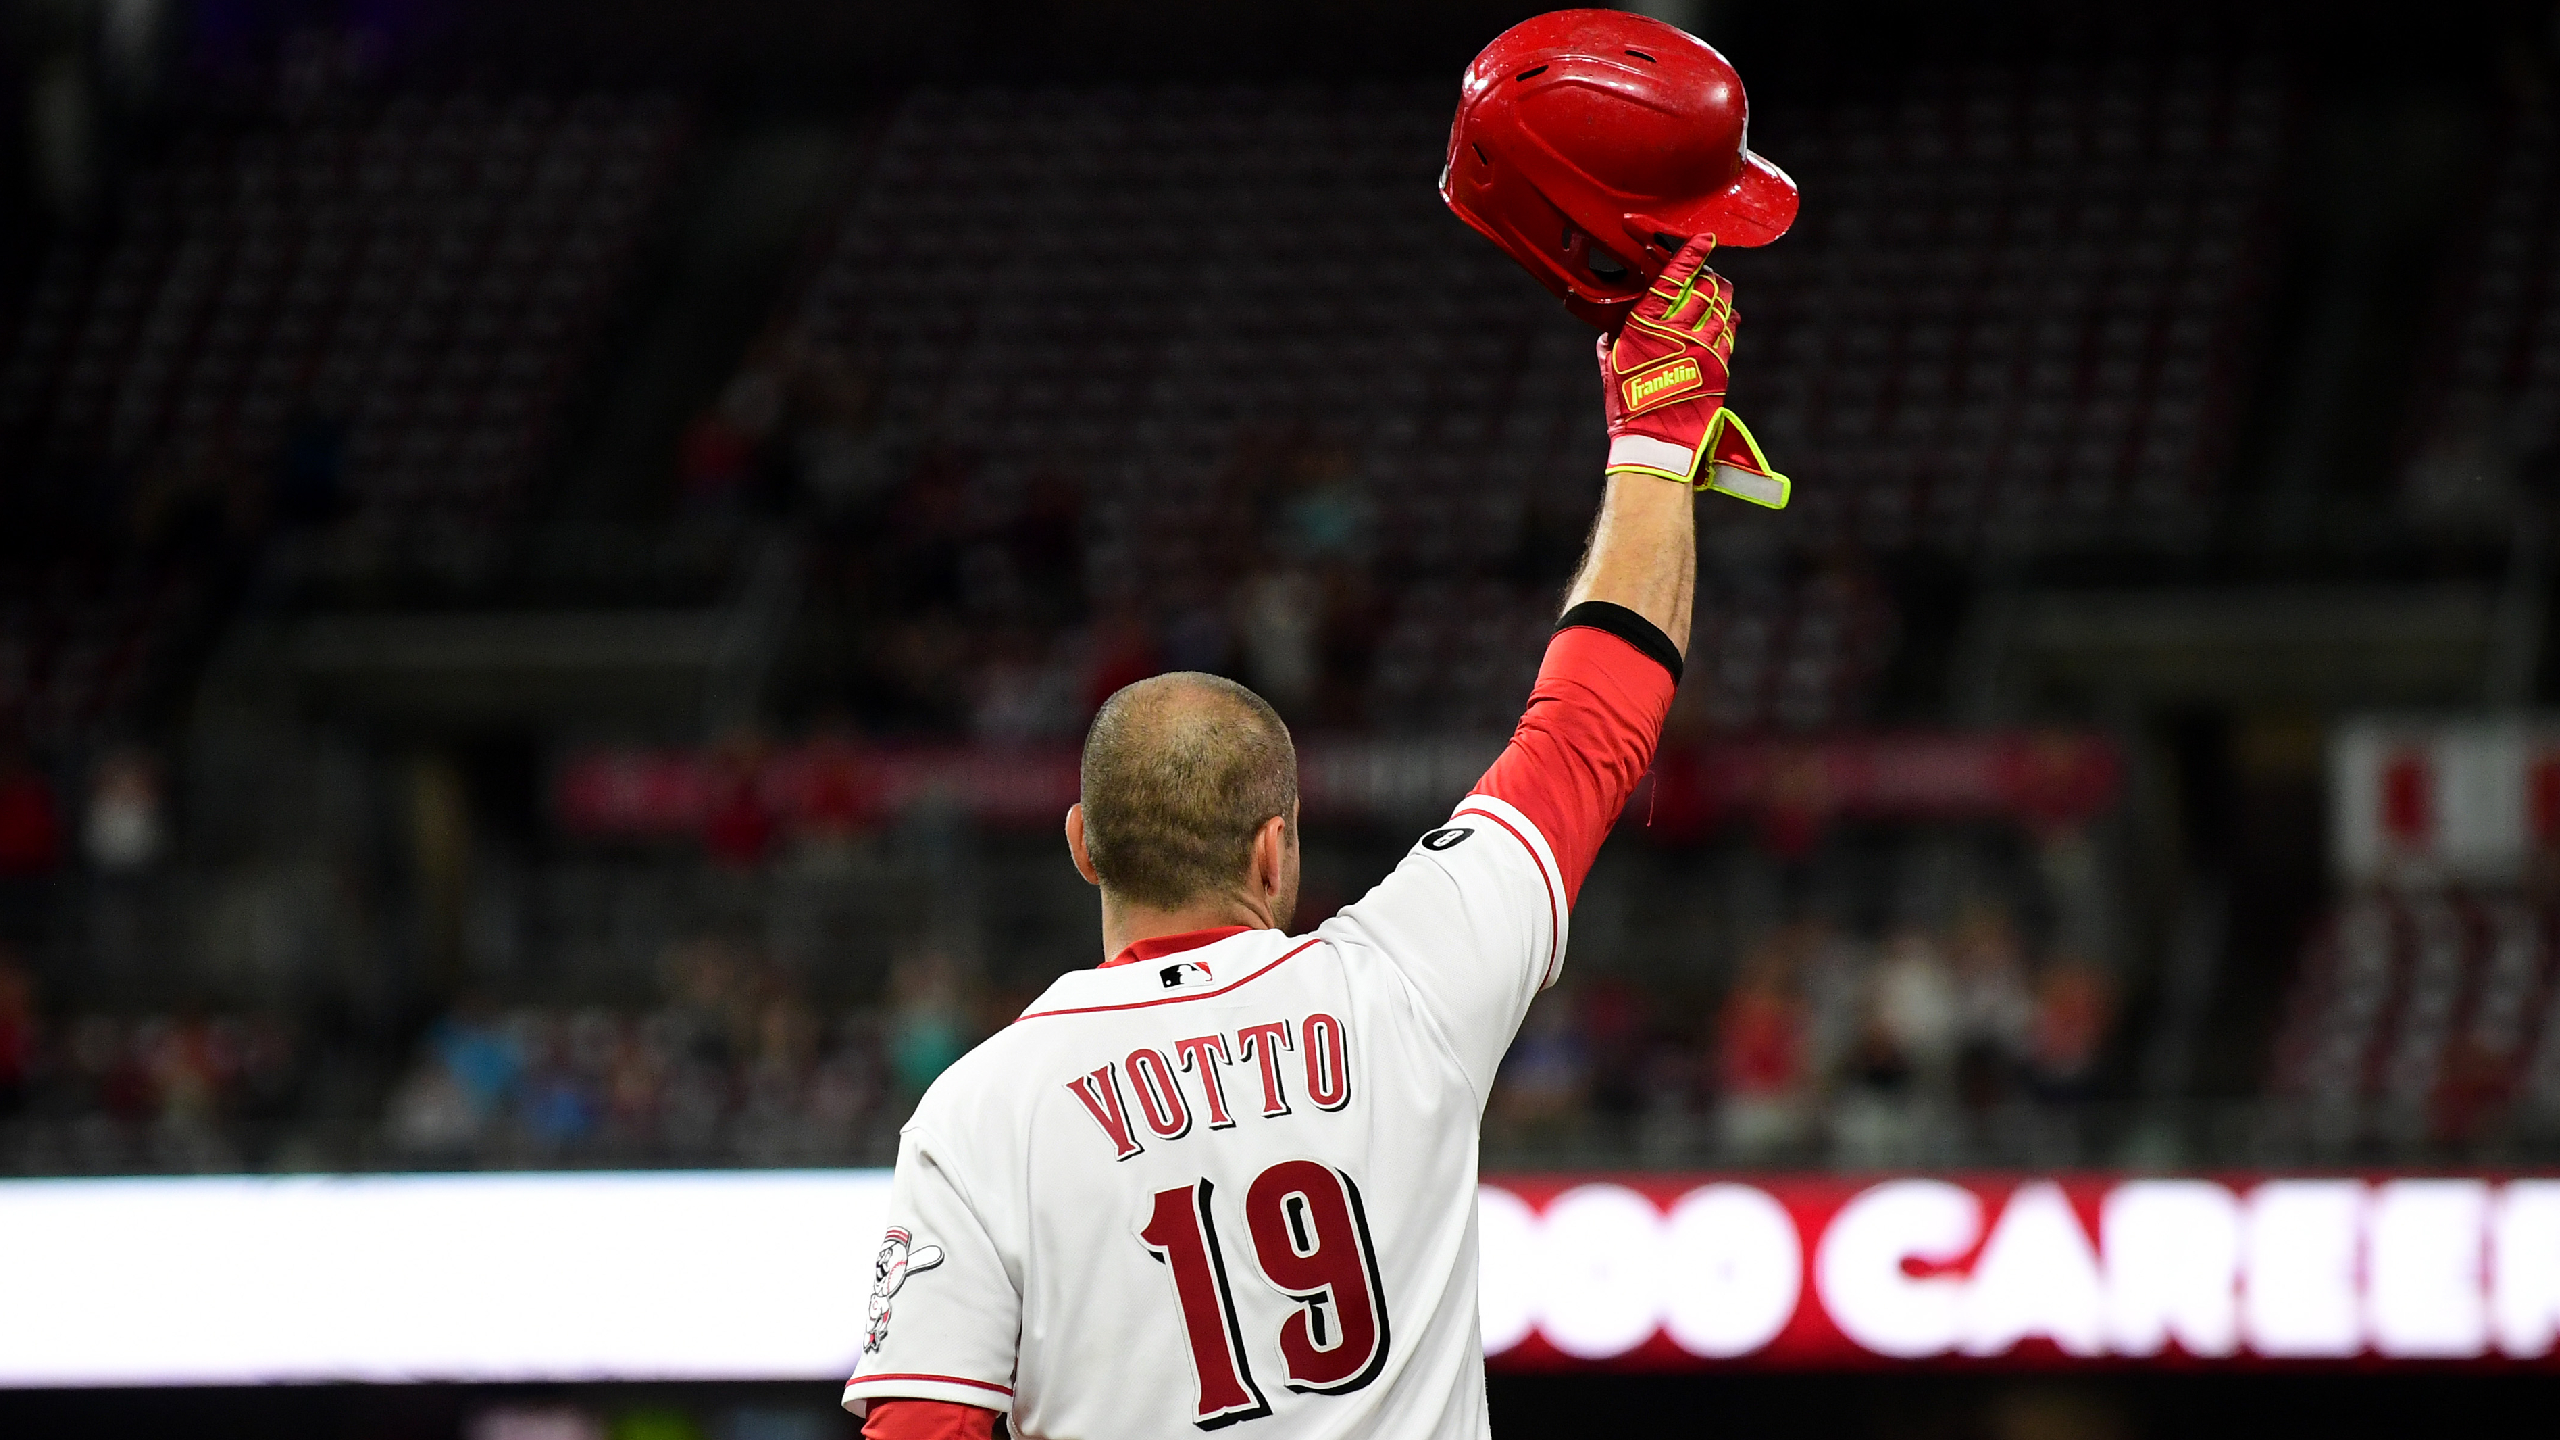 Joey Votto meets young fan who was upset following his first